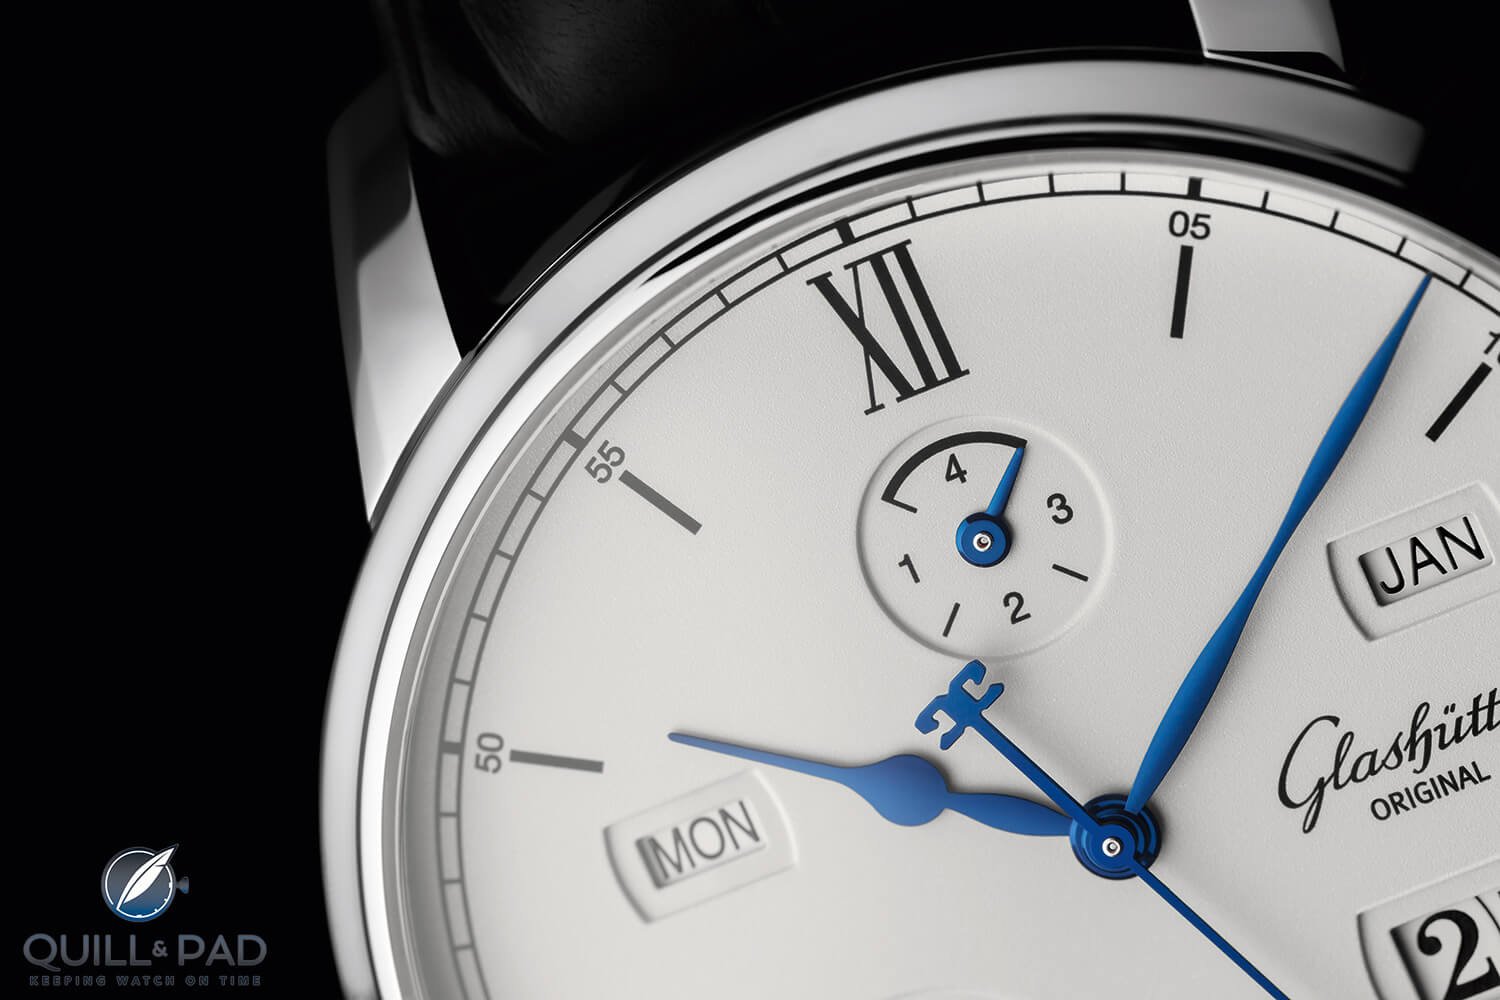 Leap year indicator at the top of the dial of the Glashütte Original Senator Excellence Perpetual Calendar